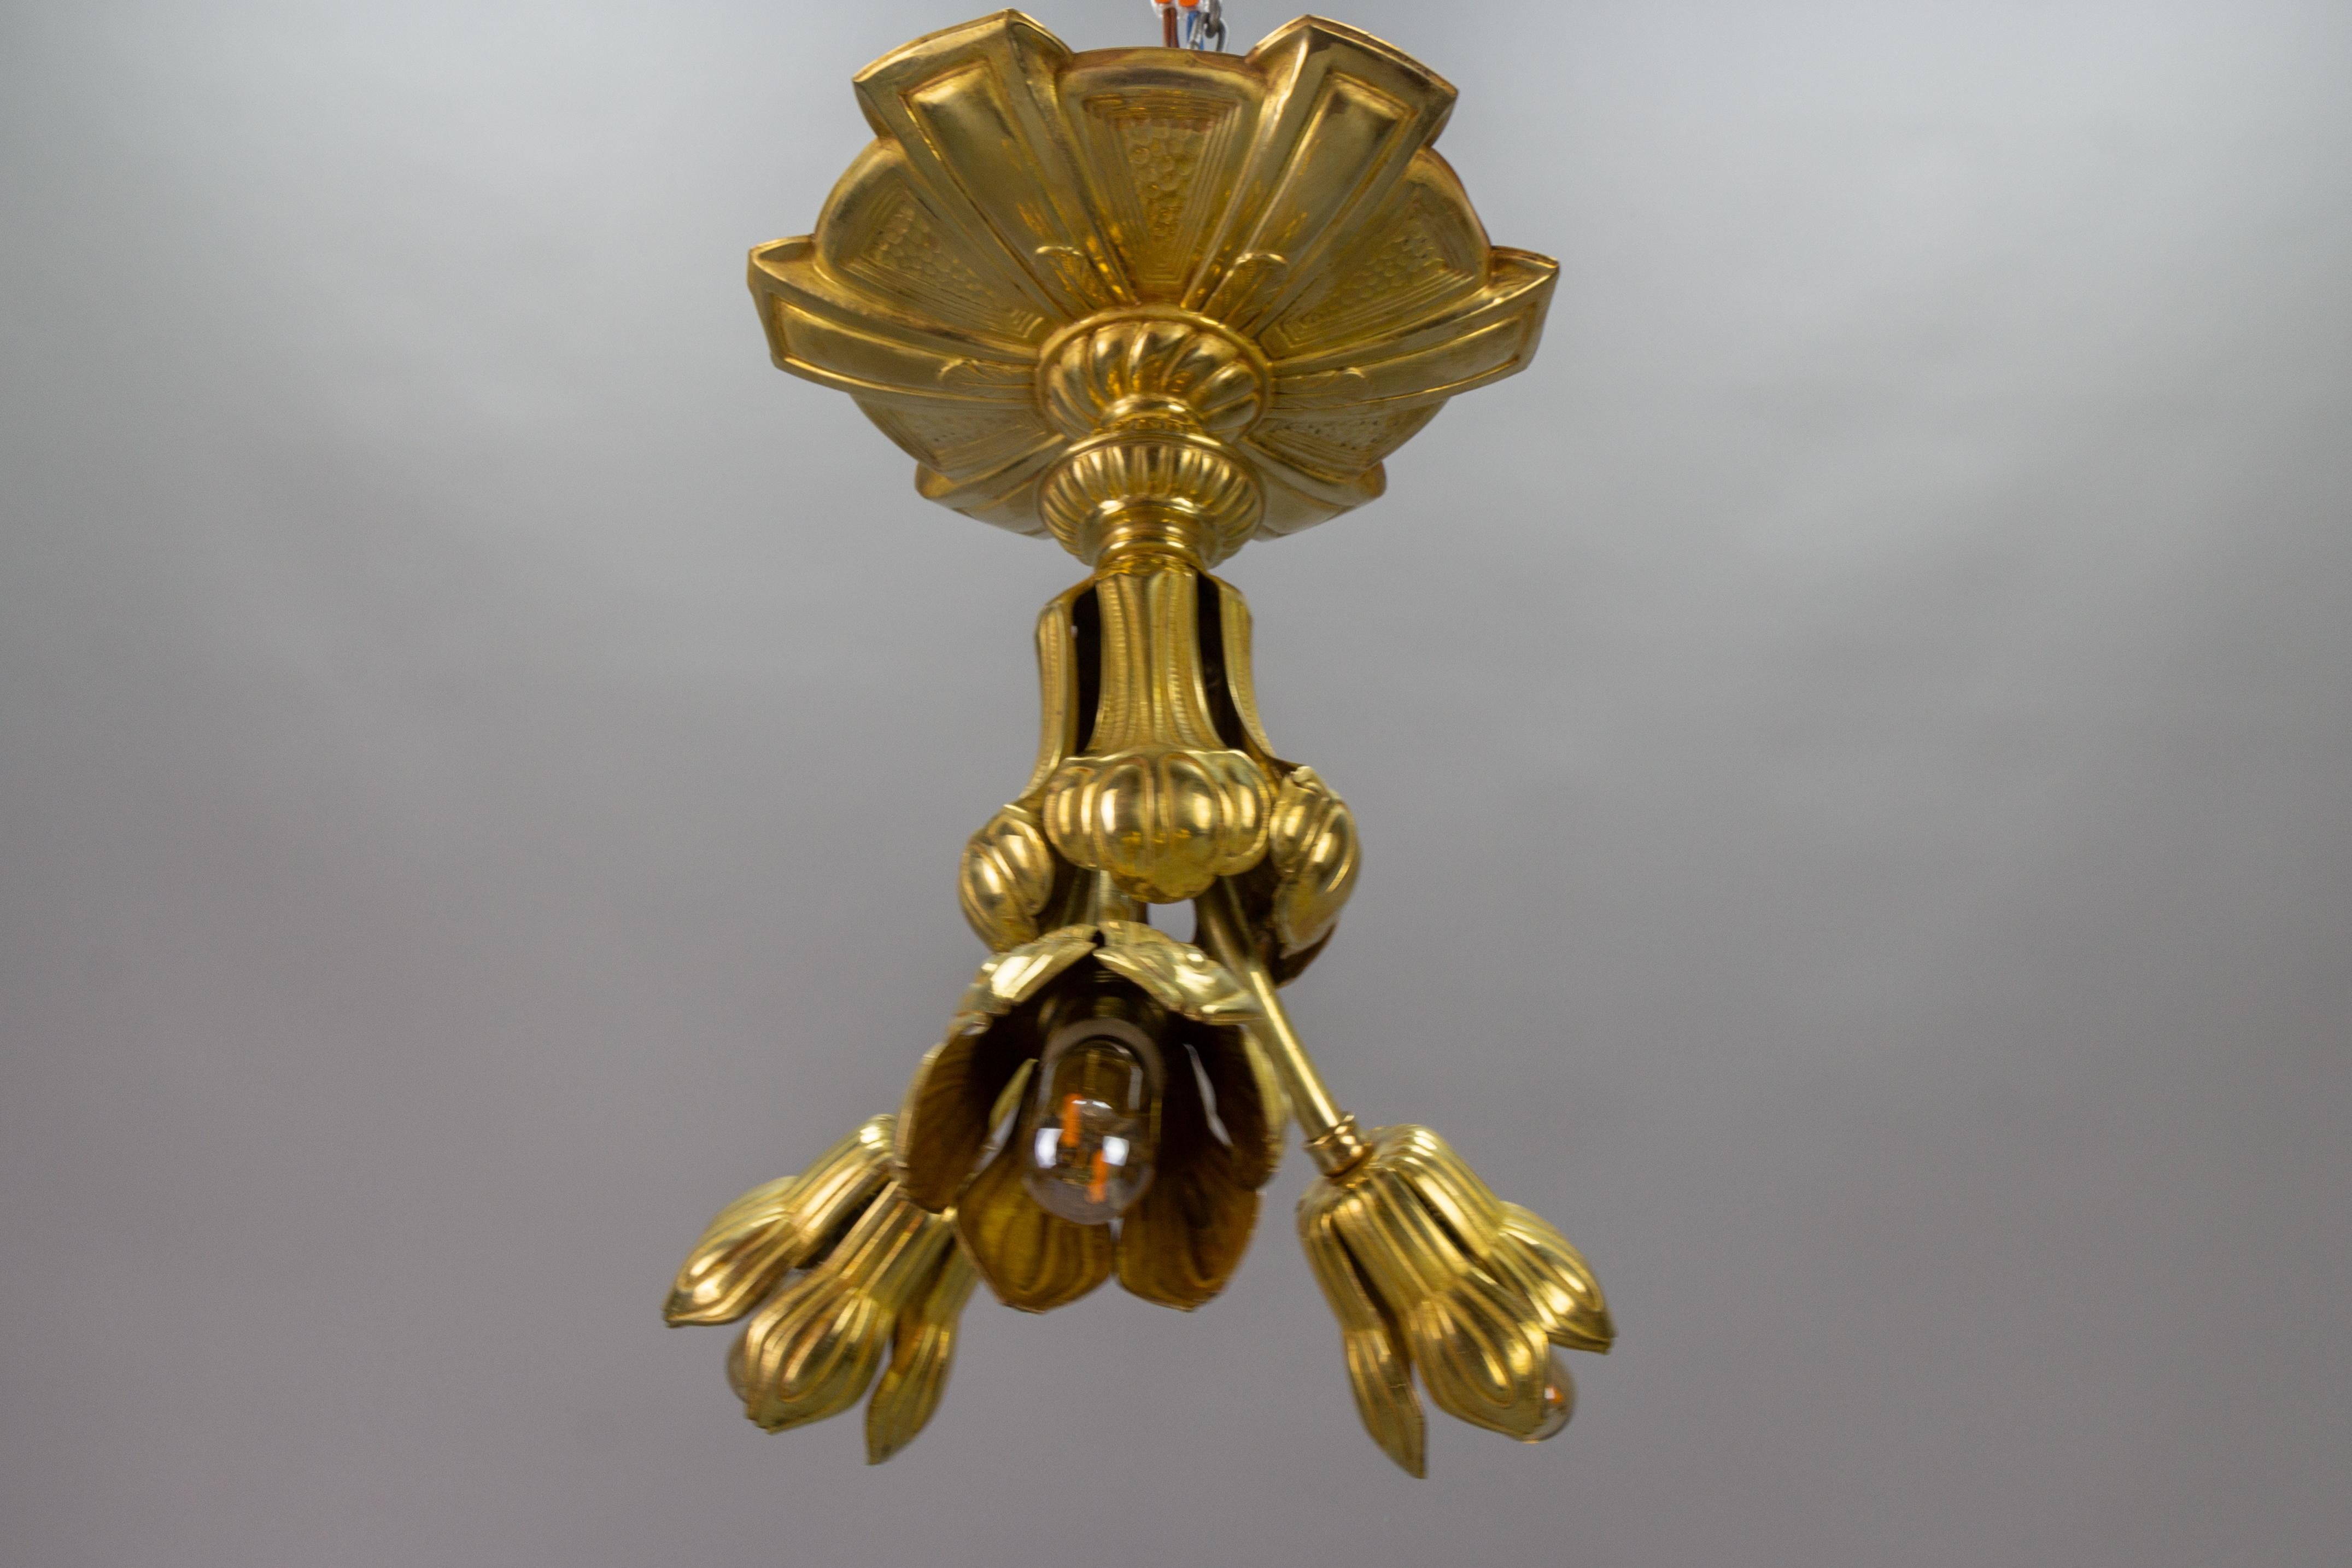  French Art Deco Three-Light Brass Ceiling Light Fixture, 1920s For Sale 2